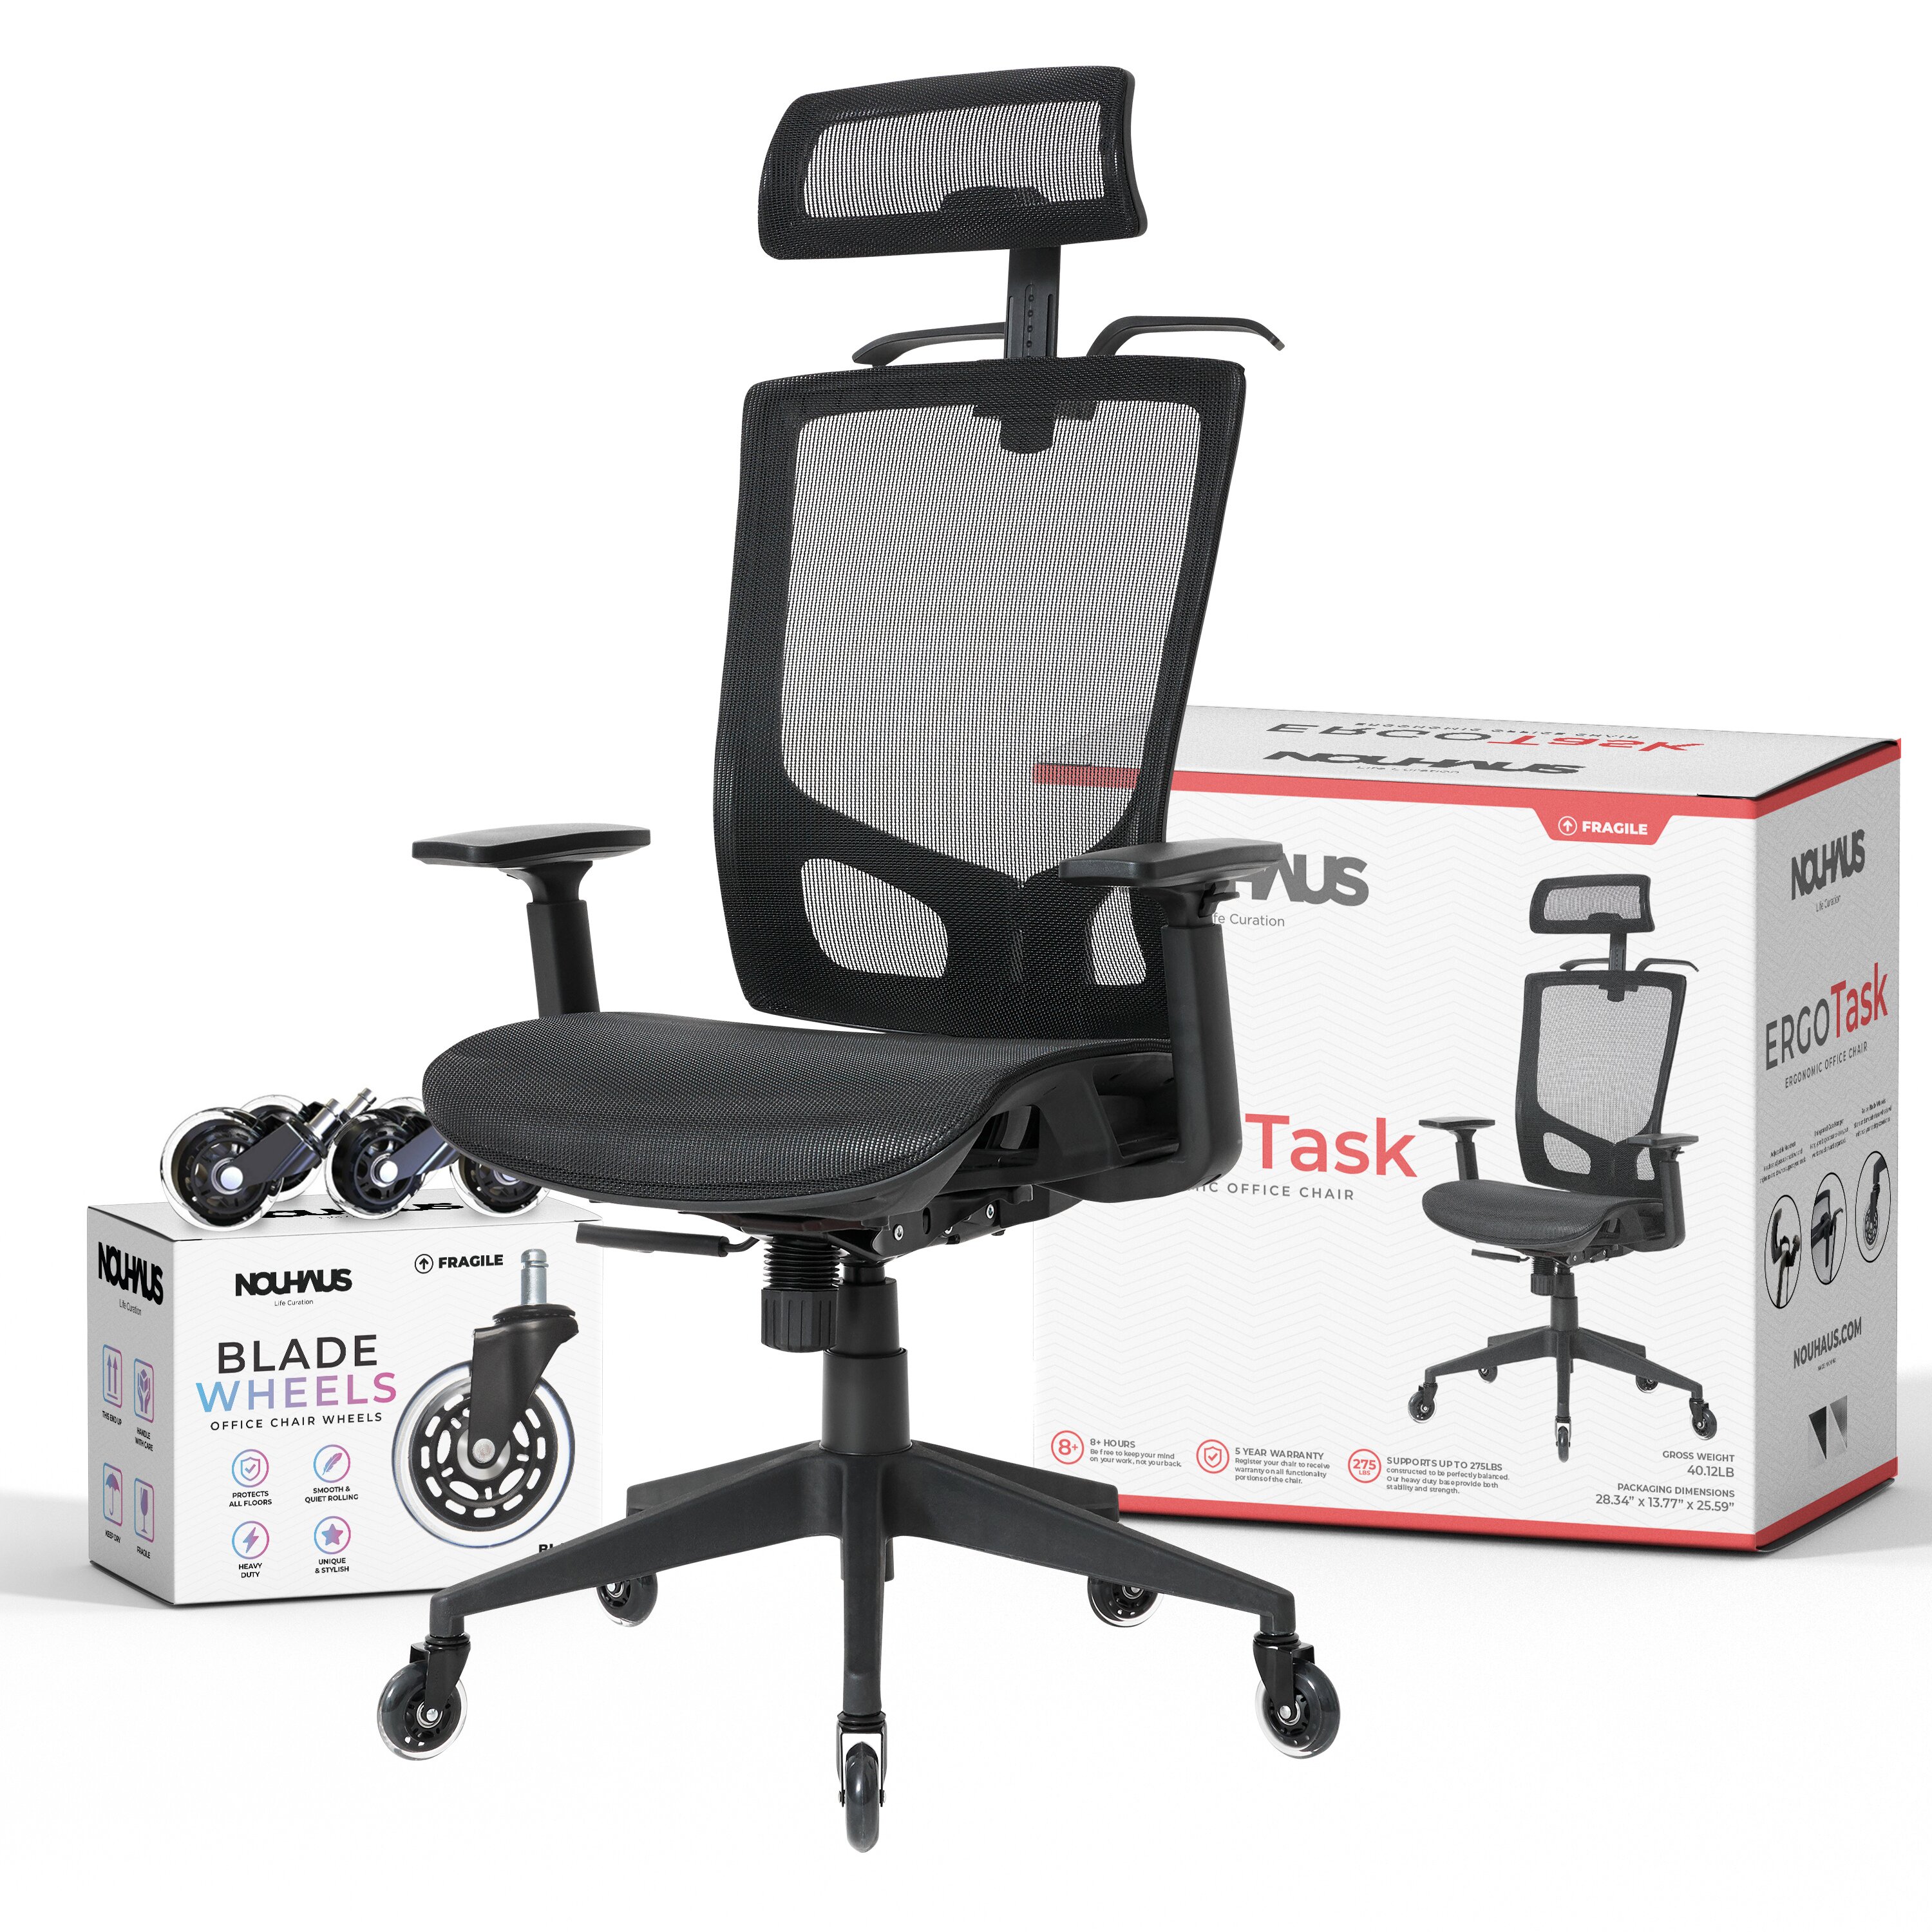 Computer Chair Headrest Chairs Accessories Multifunctional Chair